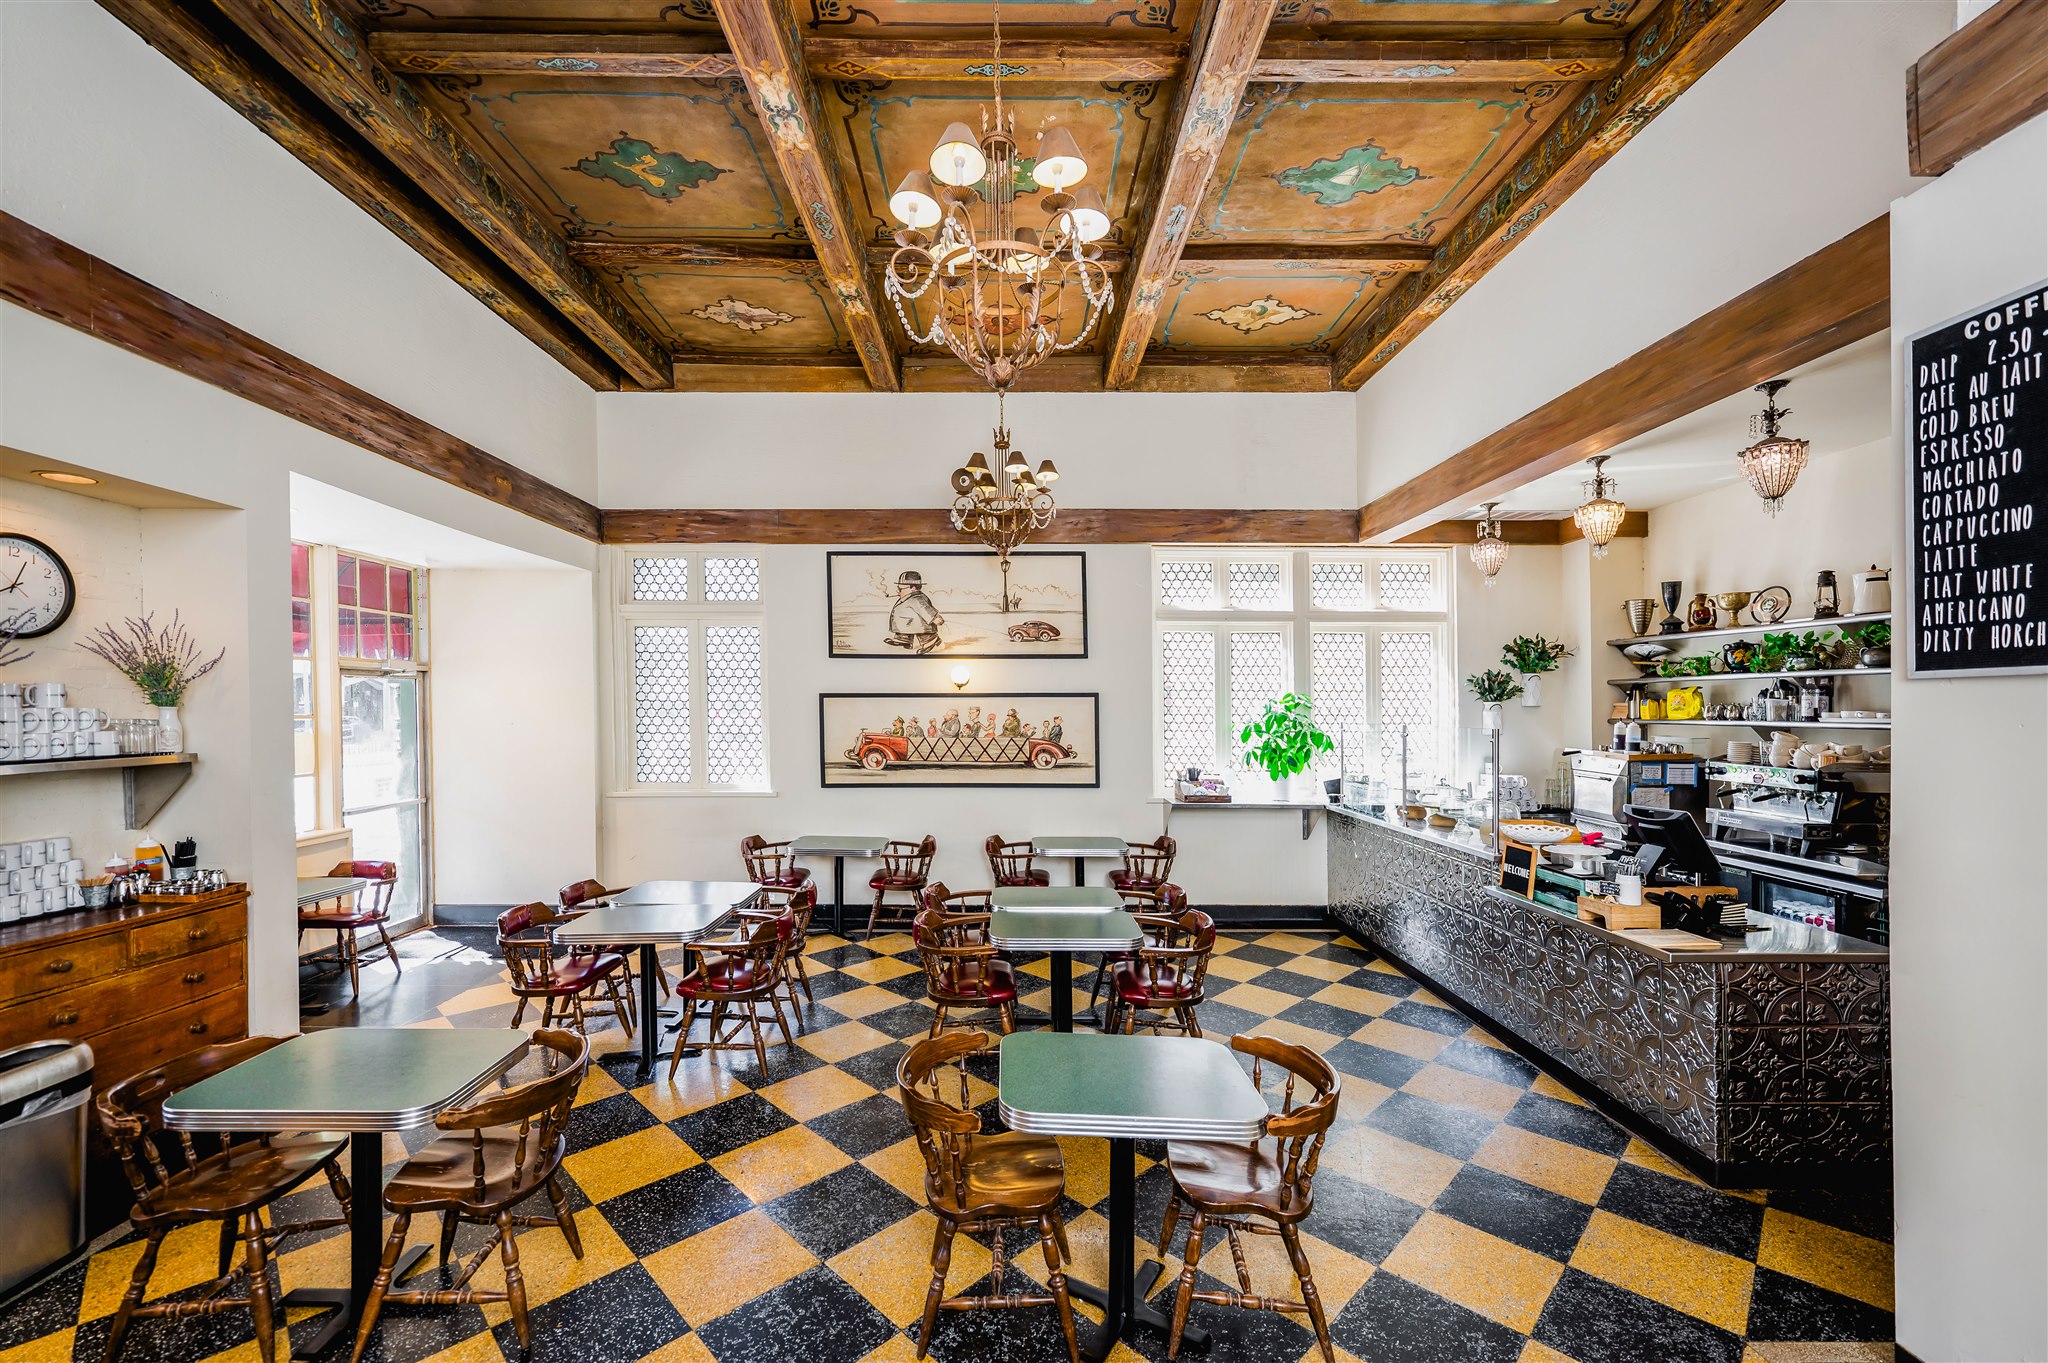 Pontchartrain Hotel restaurant with checkerboard tile